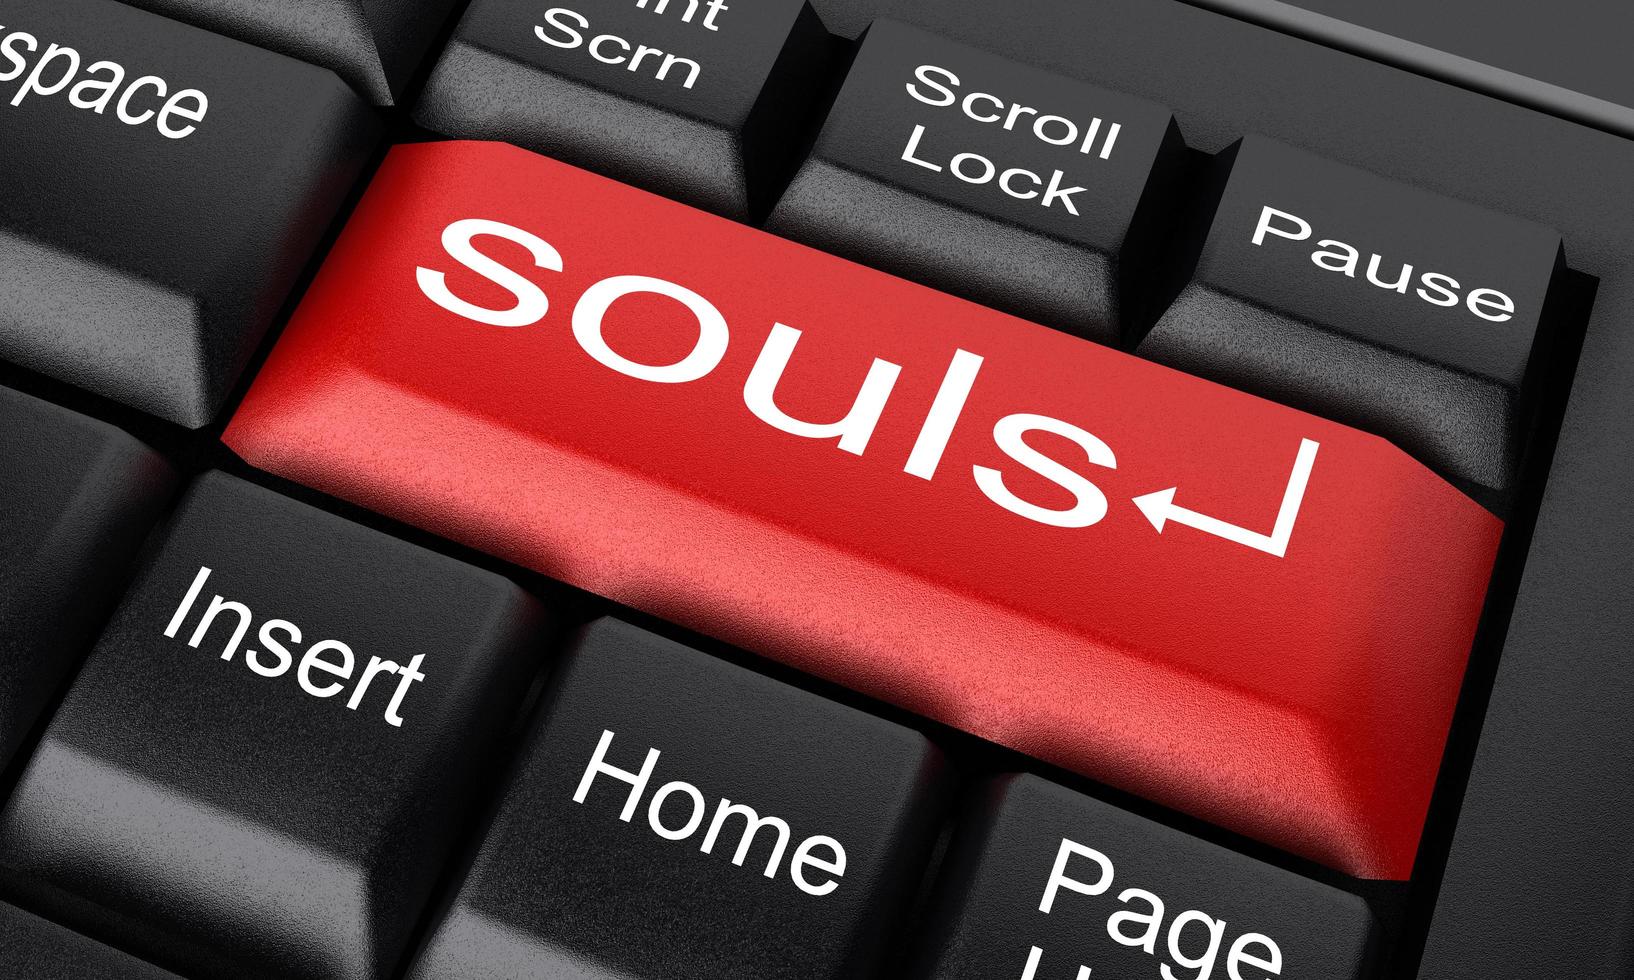 souls word on red keyboard button photo